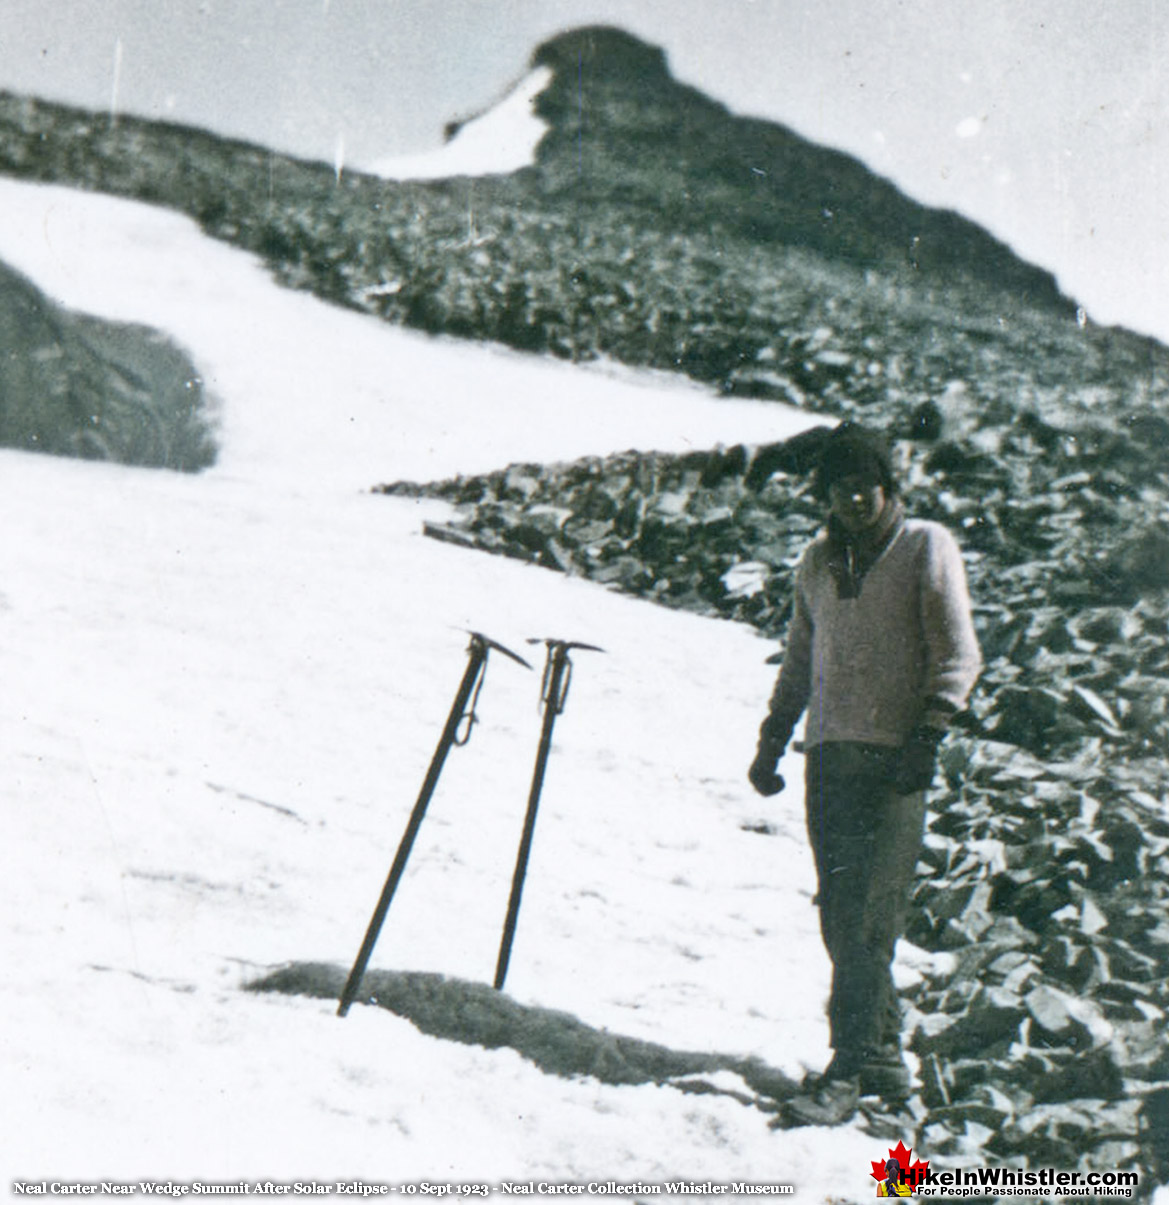 Neal Carter Near Wedge Summit After Eclipse 10 Sept 1923